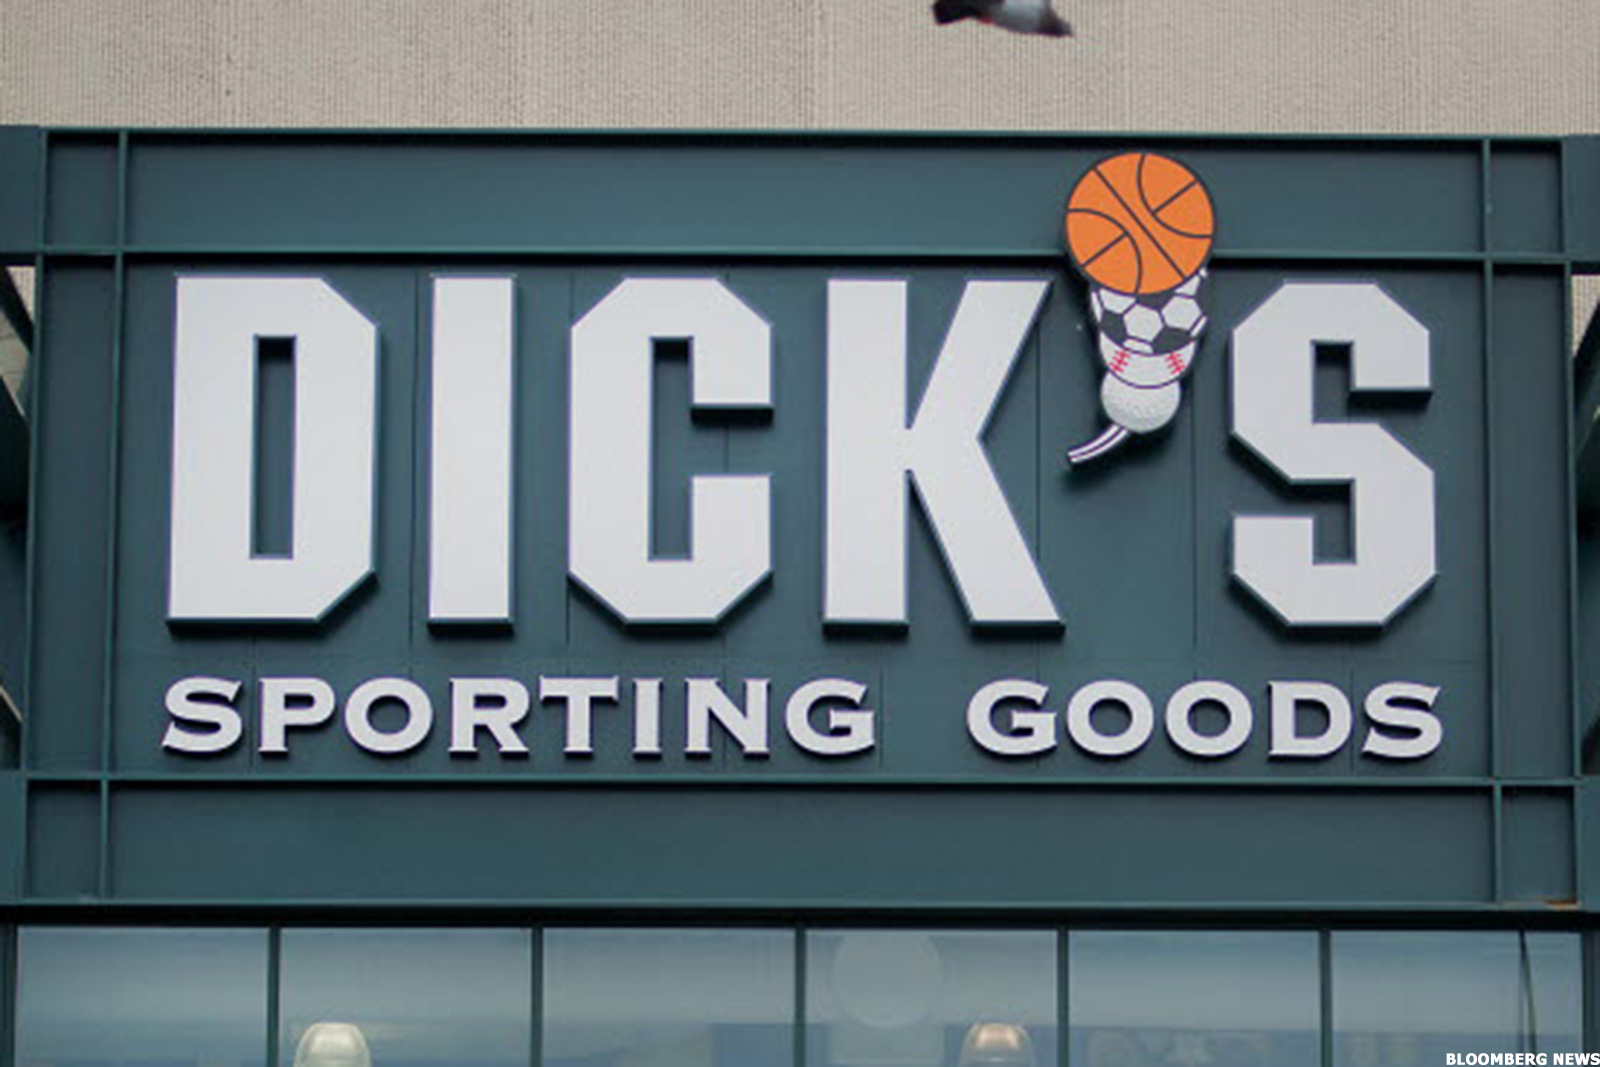 Dicks Sporting Goods Sports A Few Bearish Clues That Give Us Pause